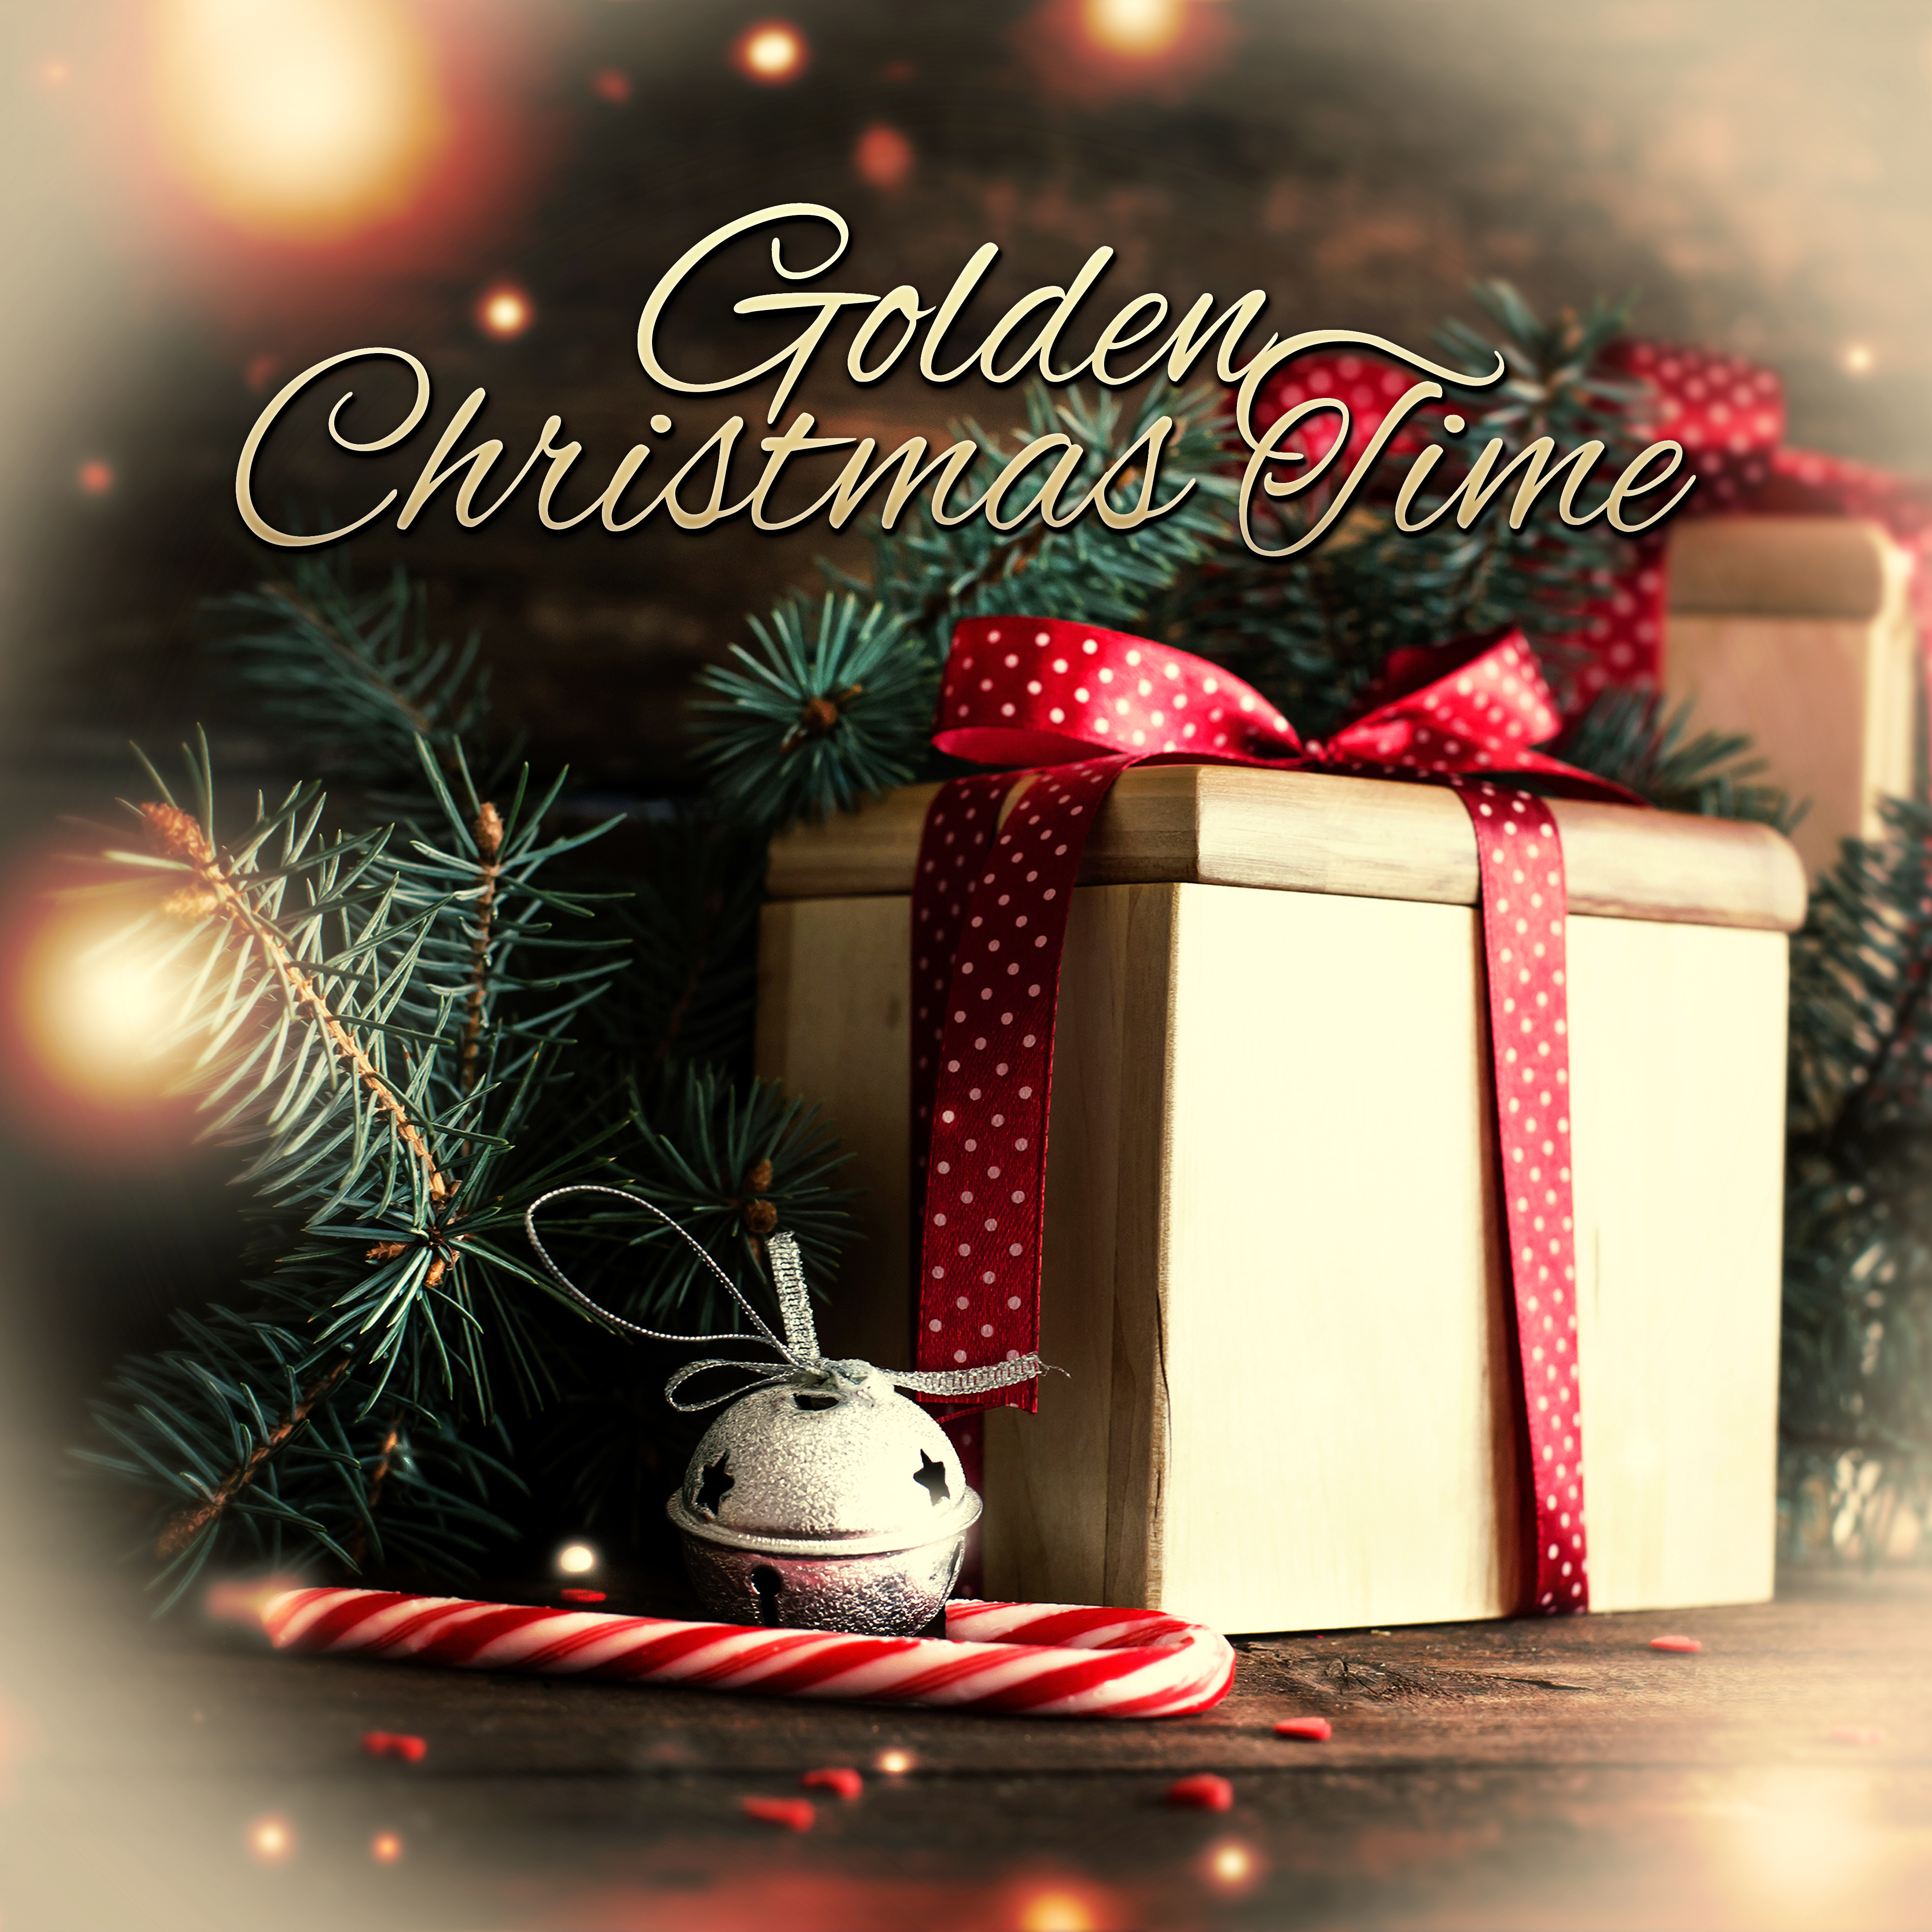 Golden Christmas Time - The Best Traditional Xmas Carols Collection, Christmas Lullabies & Lounge Music for Christmas